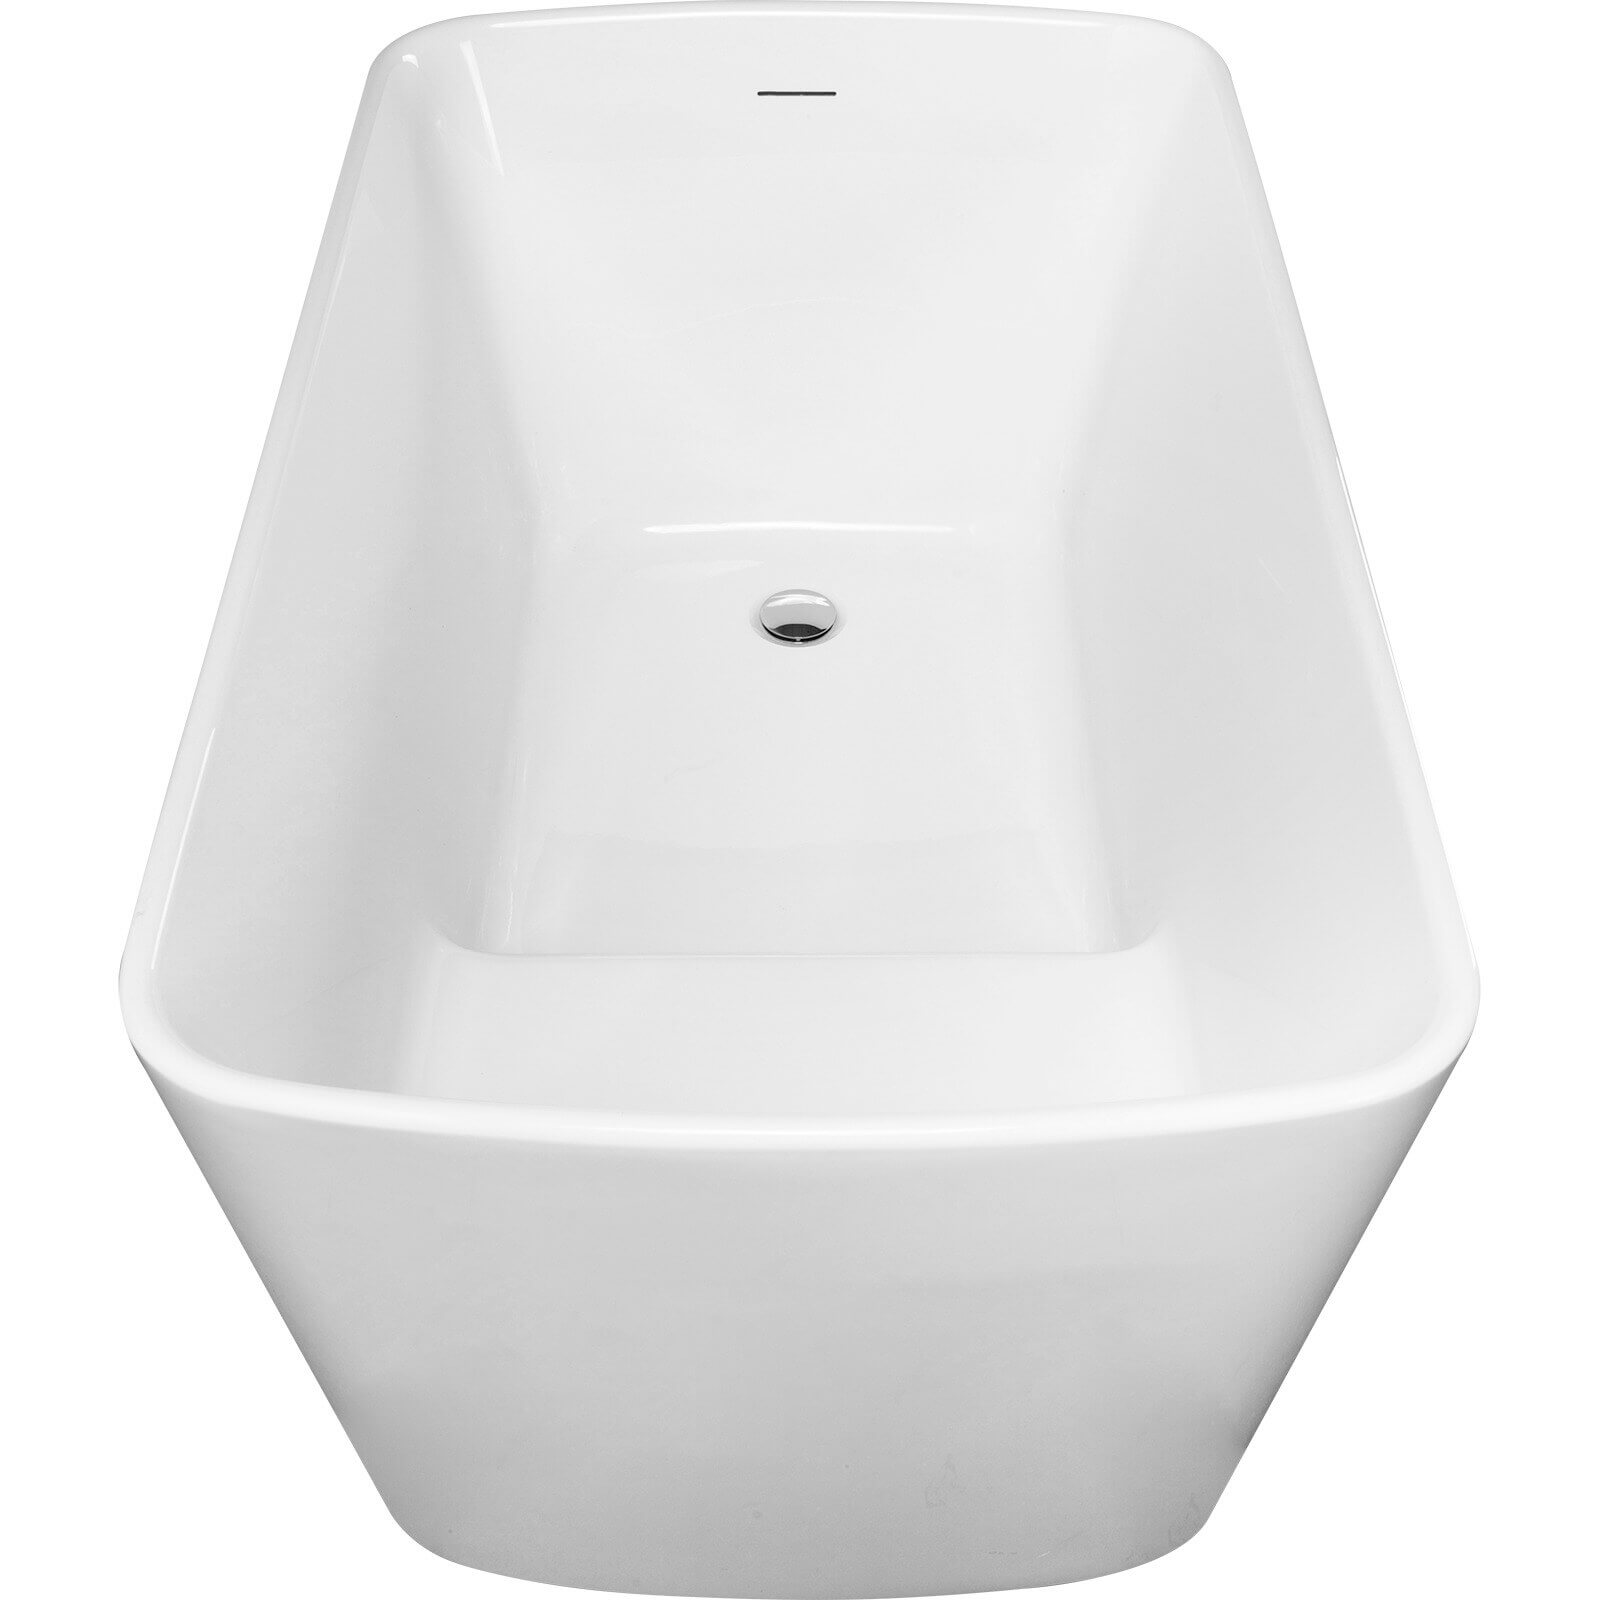 Overflow and spout for freestanding acrylic bathtub with integrated seat